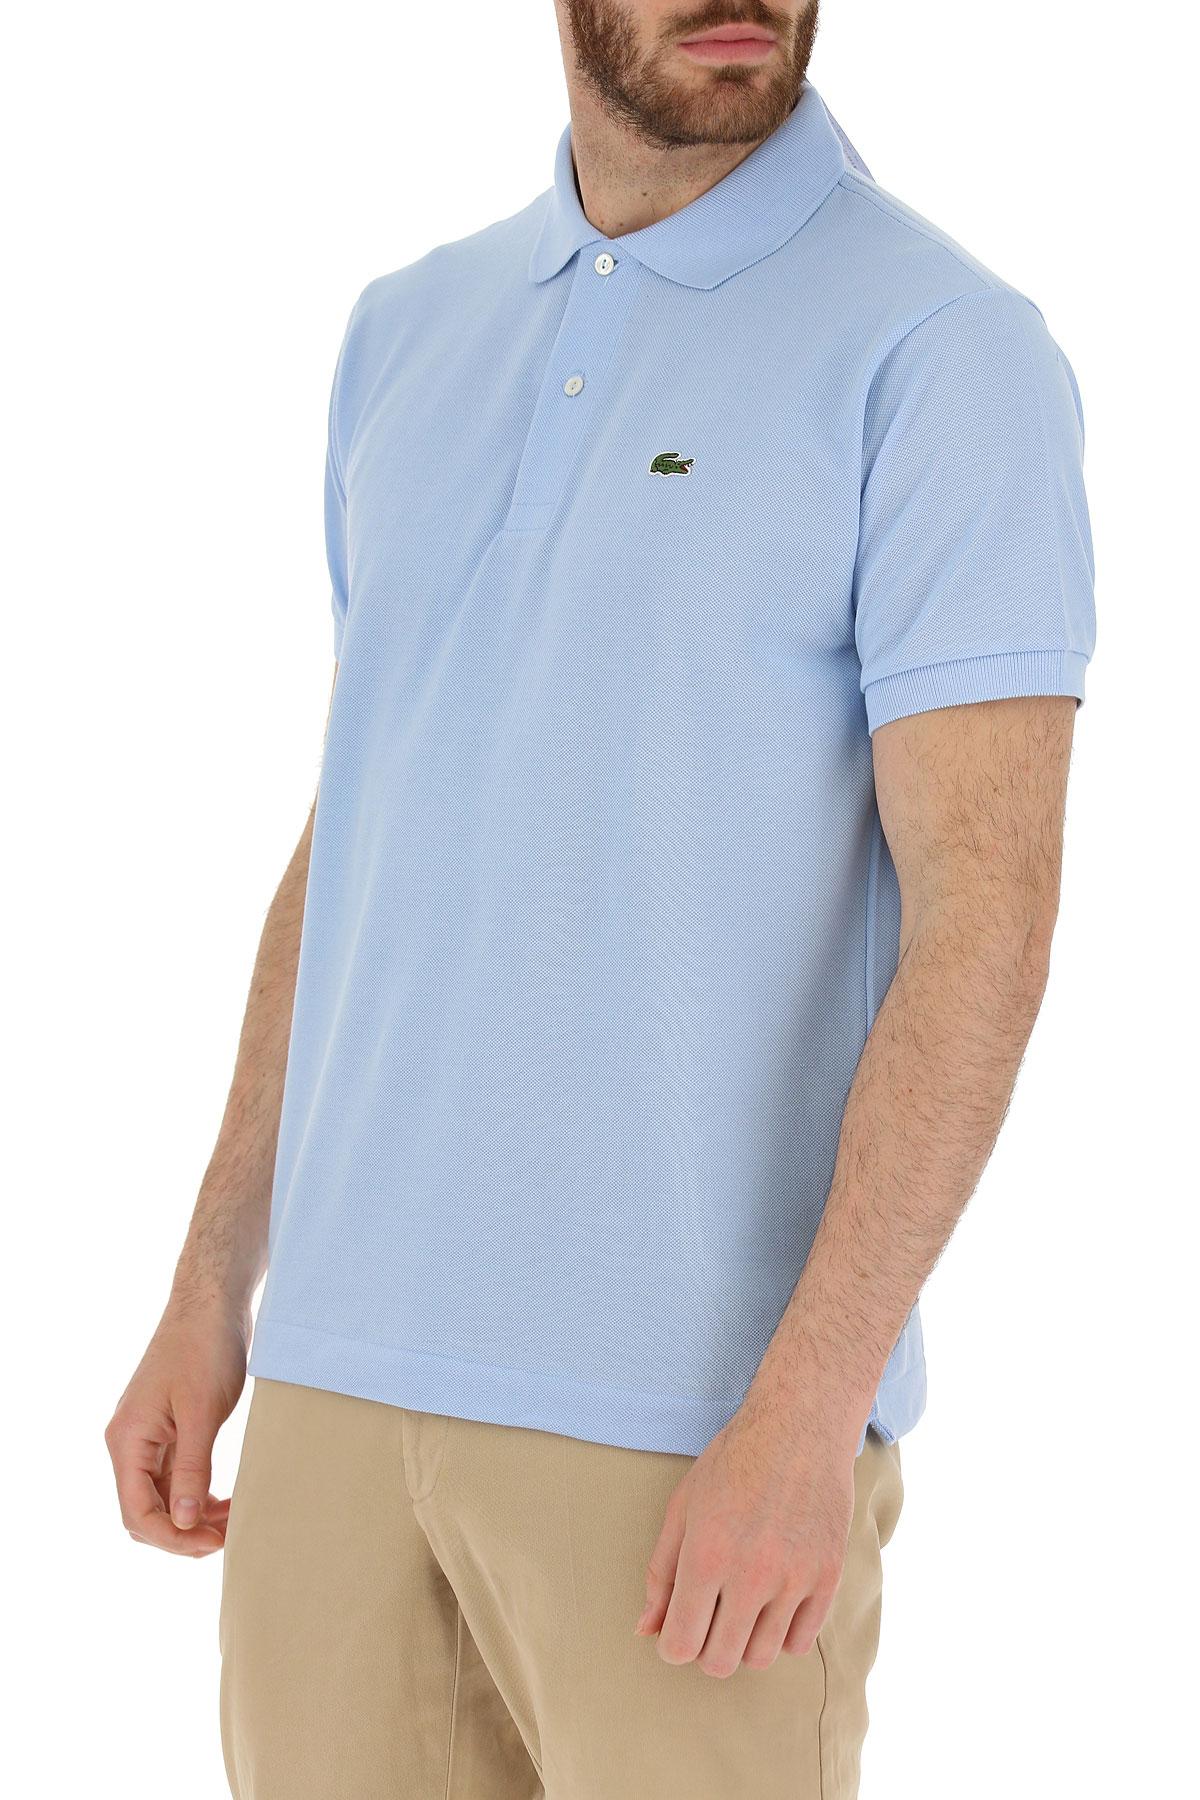 Lacoste Baby Blue Polo | vlr.eng.br